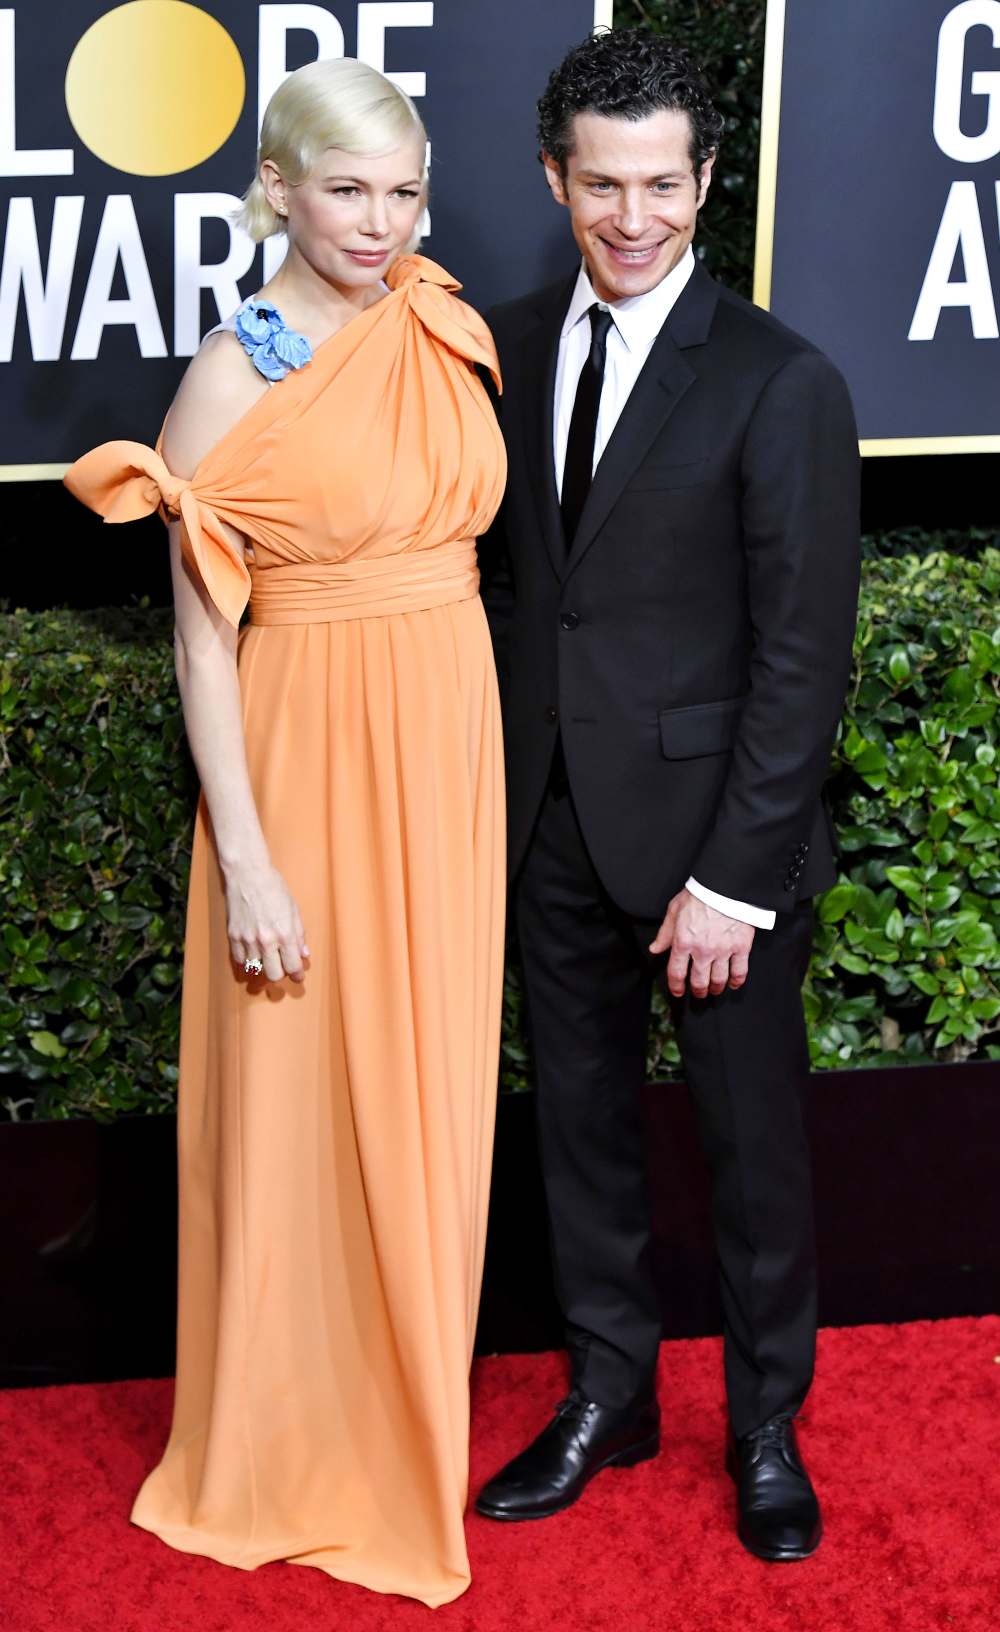 Michelle Williams Shouts Out Daughter New Fiance Golden Globes 2020 After Powerful Speech